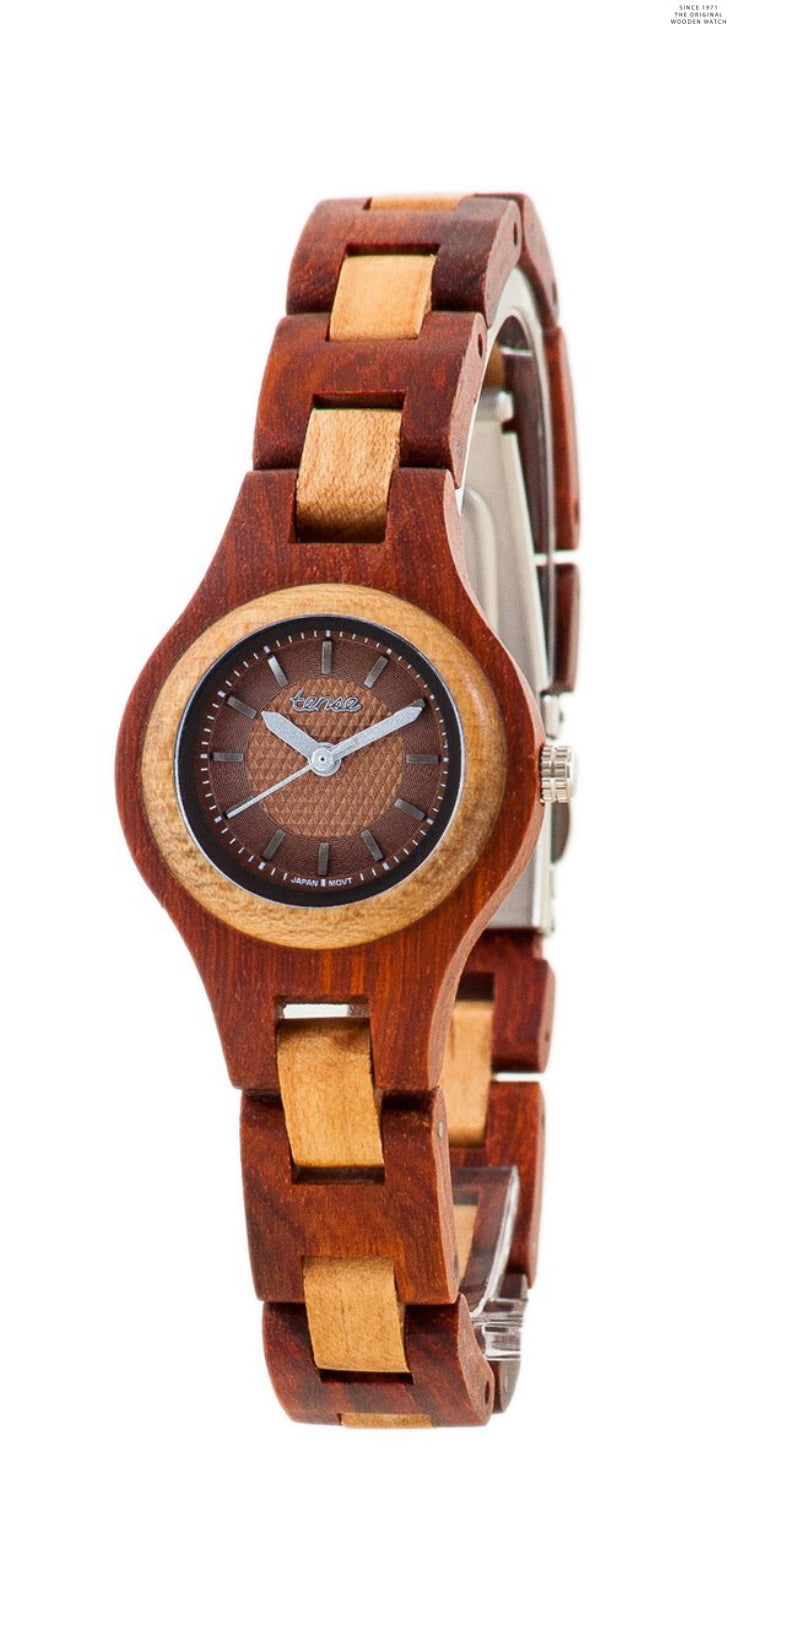 Tense Ladies Wood Watches Small Pacific Katalox/Maplewood Locally Hand Made